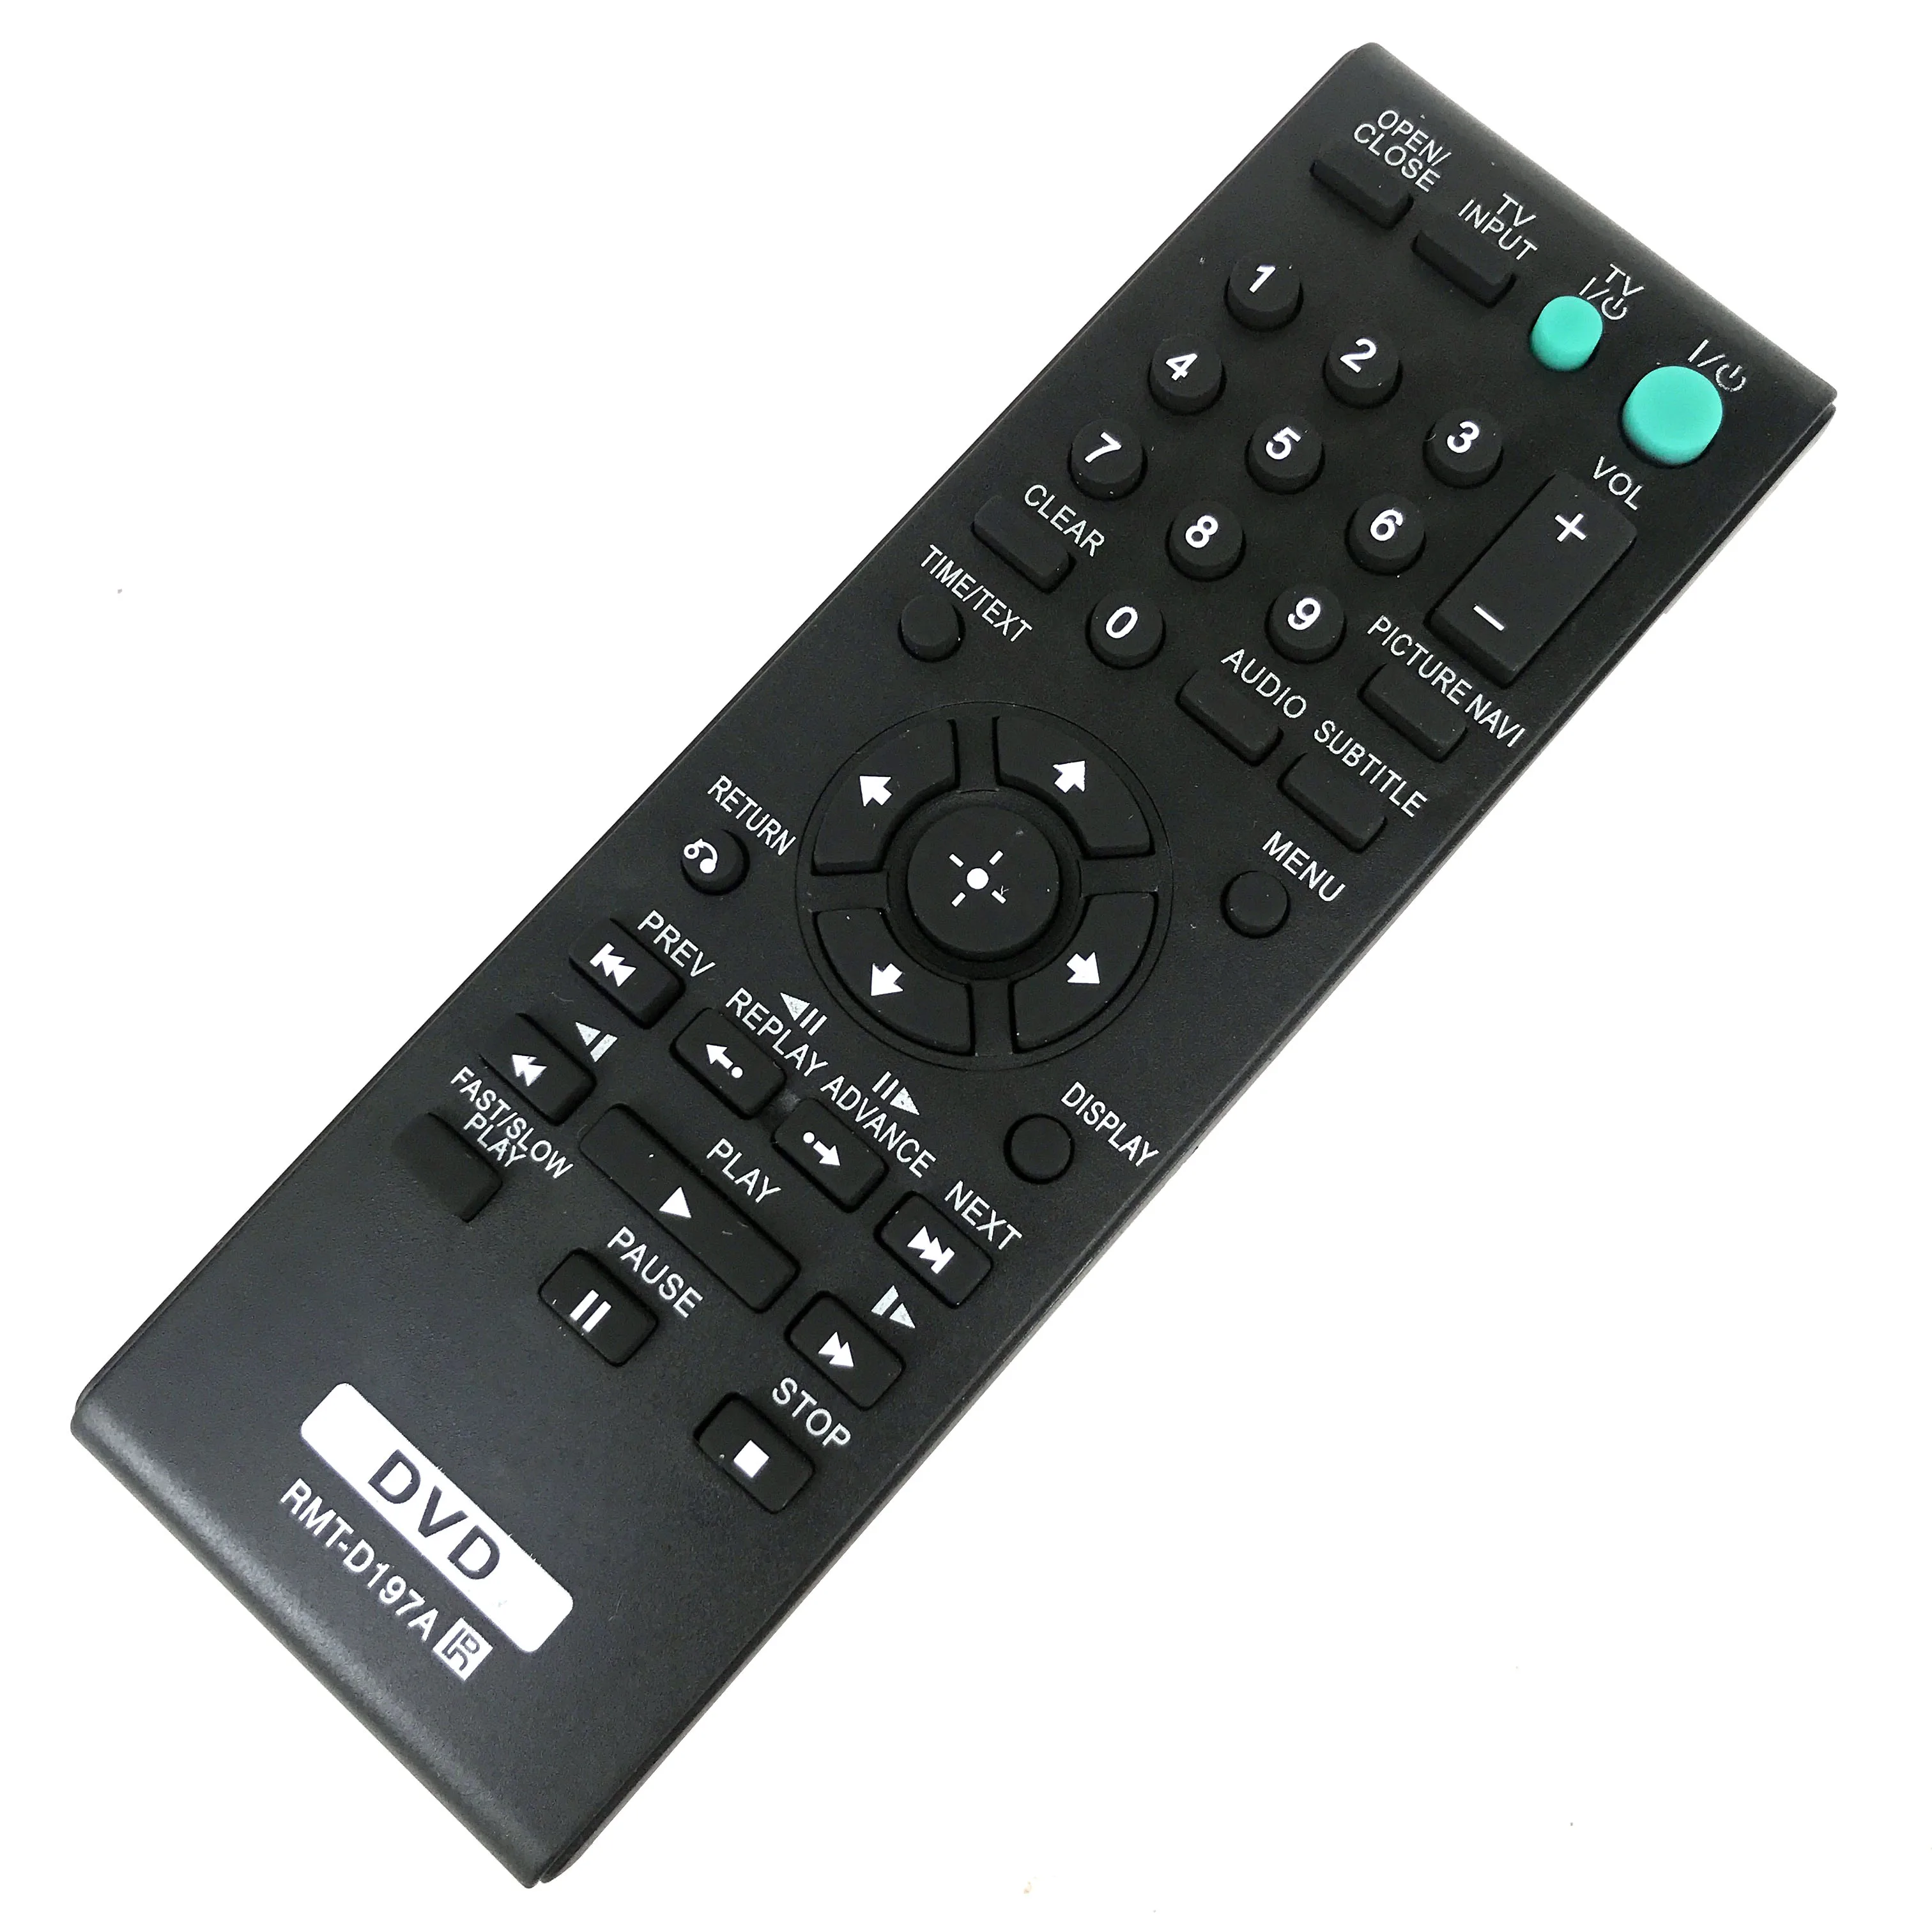 Peave Distributie Systematisch New Remote Control Rmt-d197a For Sony Fit For Dvd Player Dvp-sr320  Dvp-sr210p Dvp-sr110 Dvp-sr115 Dvp -sr120 Sr310p Dvp-sr405p - Remote  Control - AliExpress